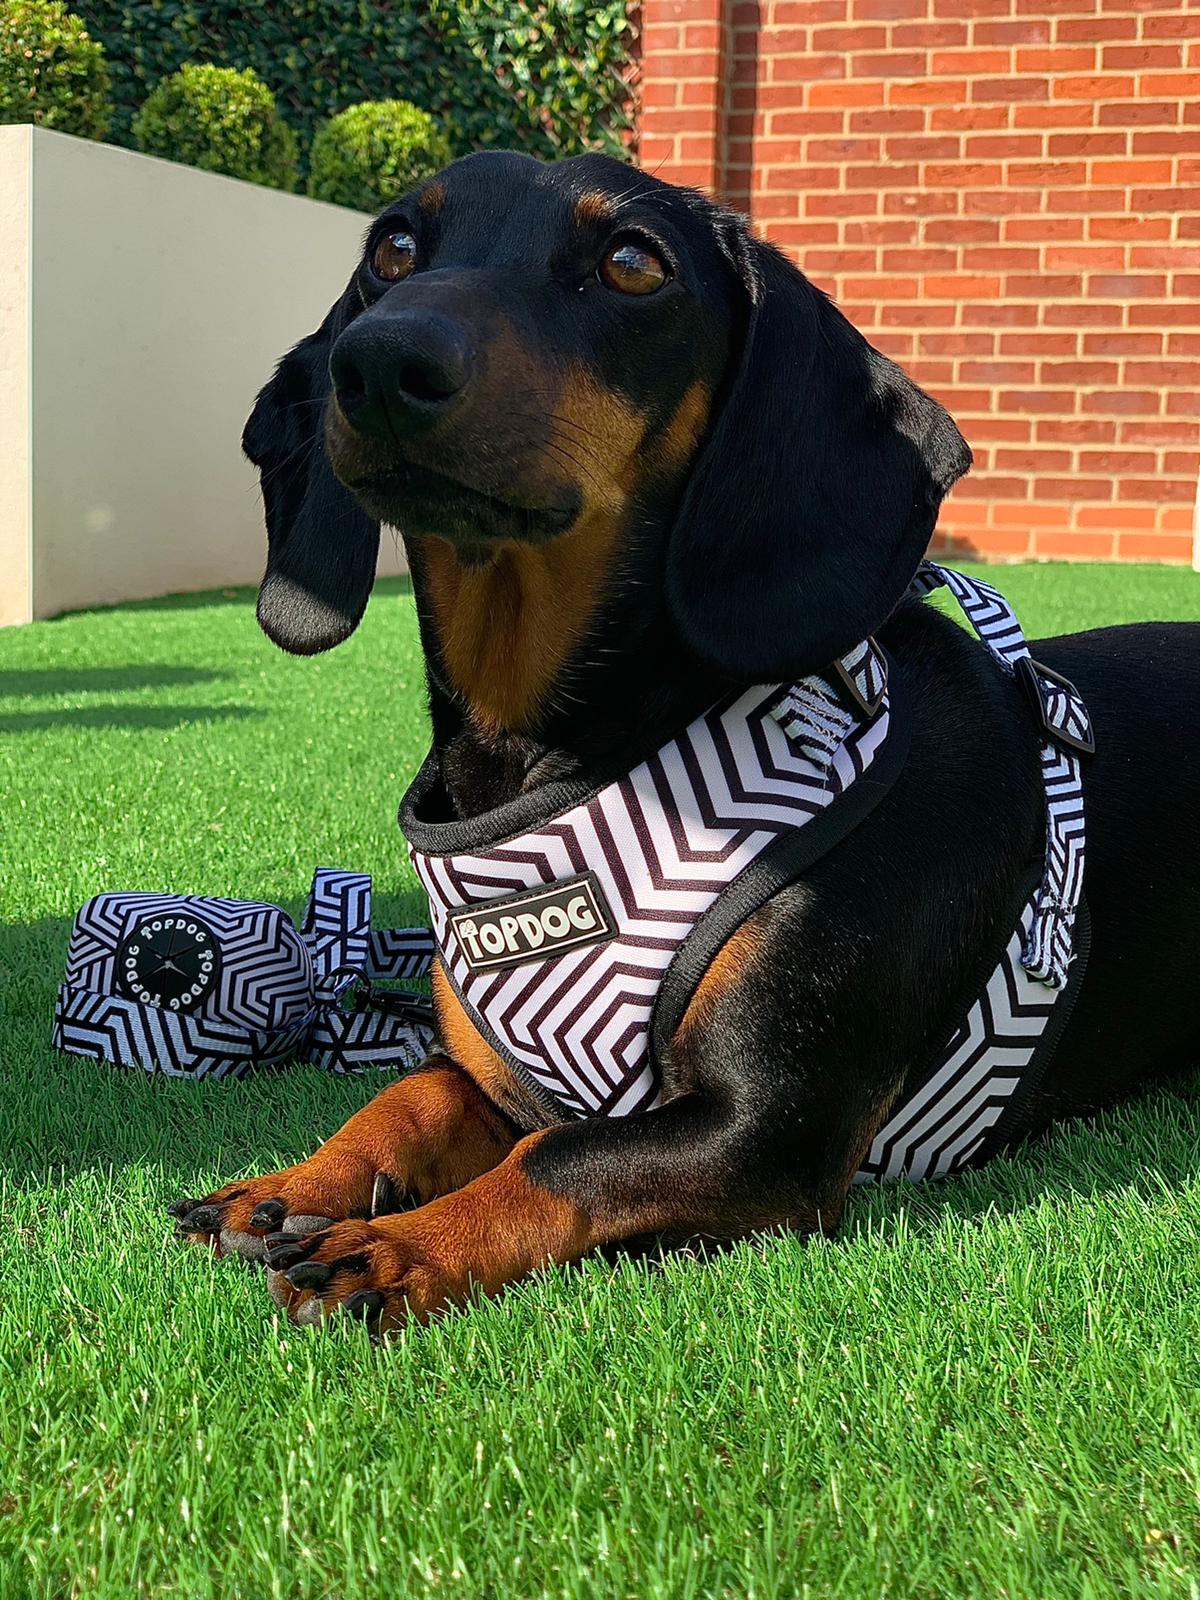 Dachshund wearing a TopDog Harnesses It's Just an Illusion Adjustable dog harness sitting on the grass